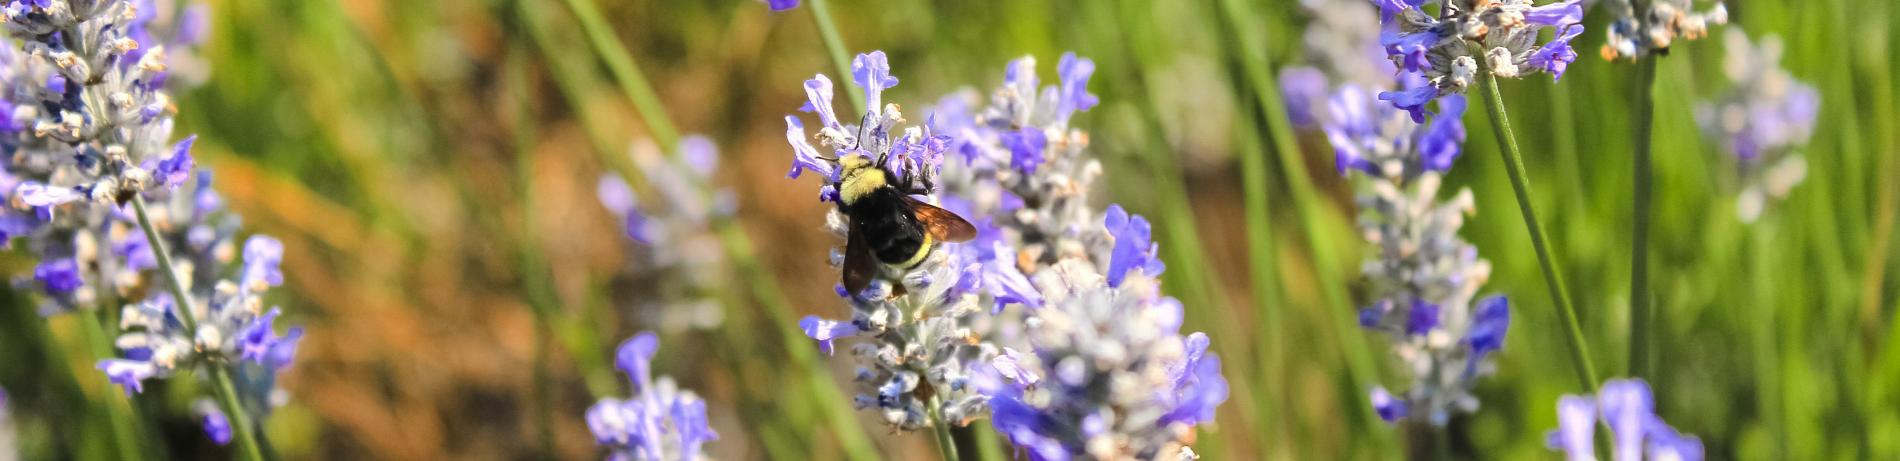 Close up of a fluffy bee on lavender flower flowers